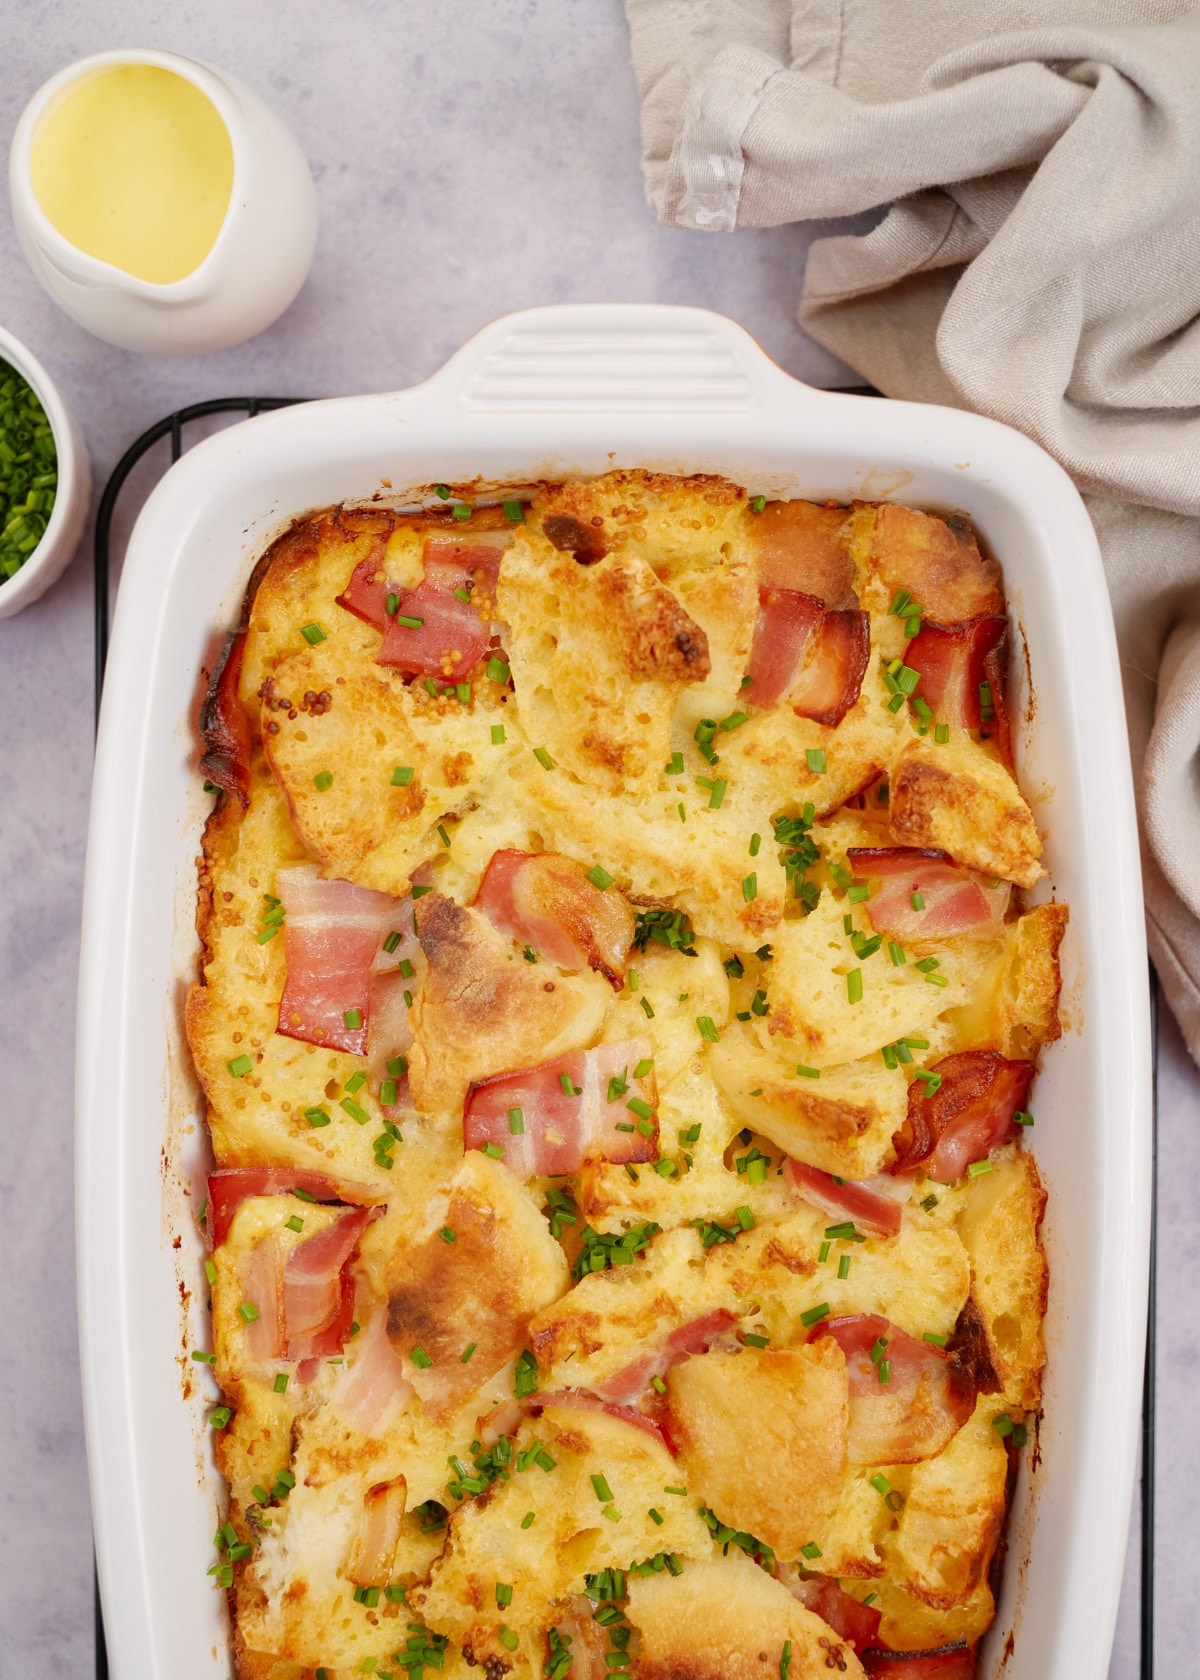 baked eggs benedict casserole in a white baking dish